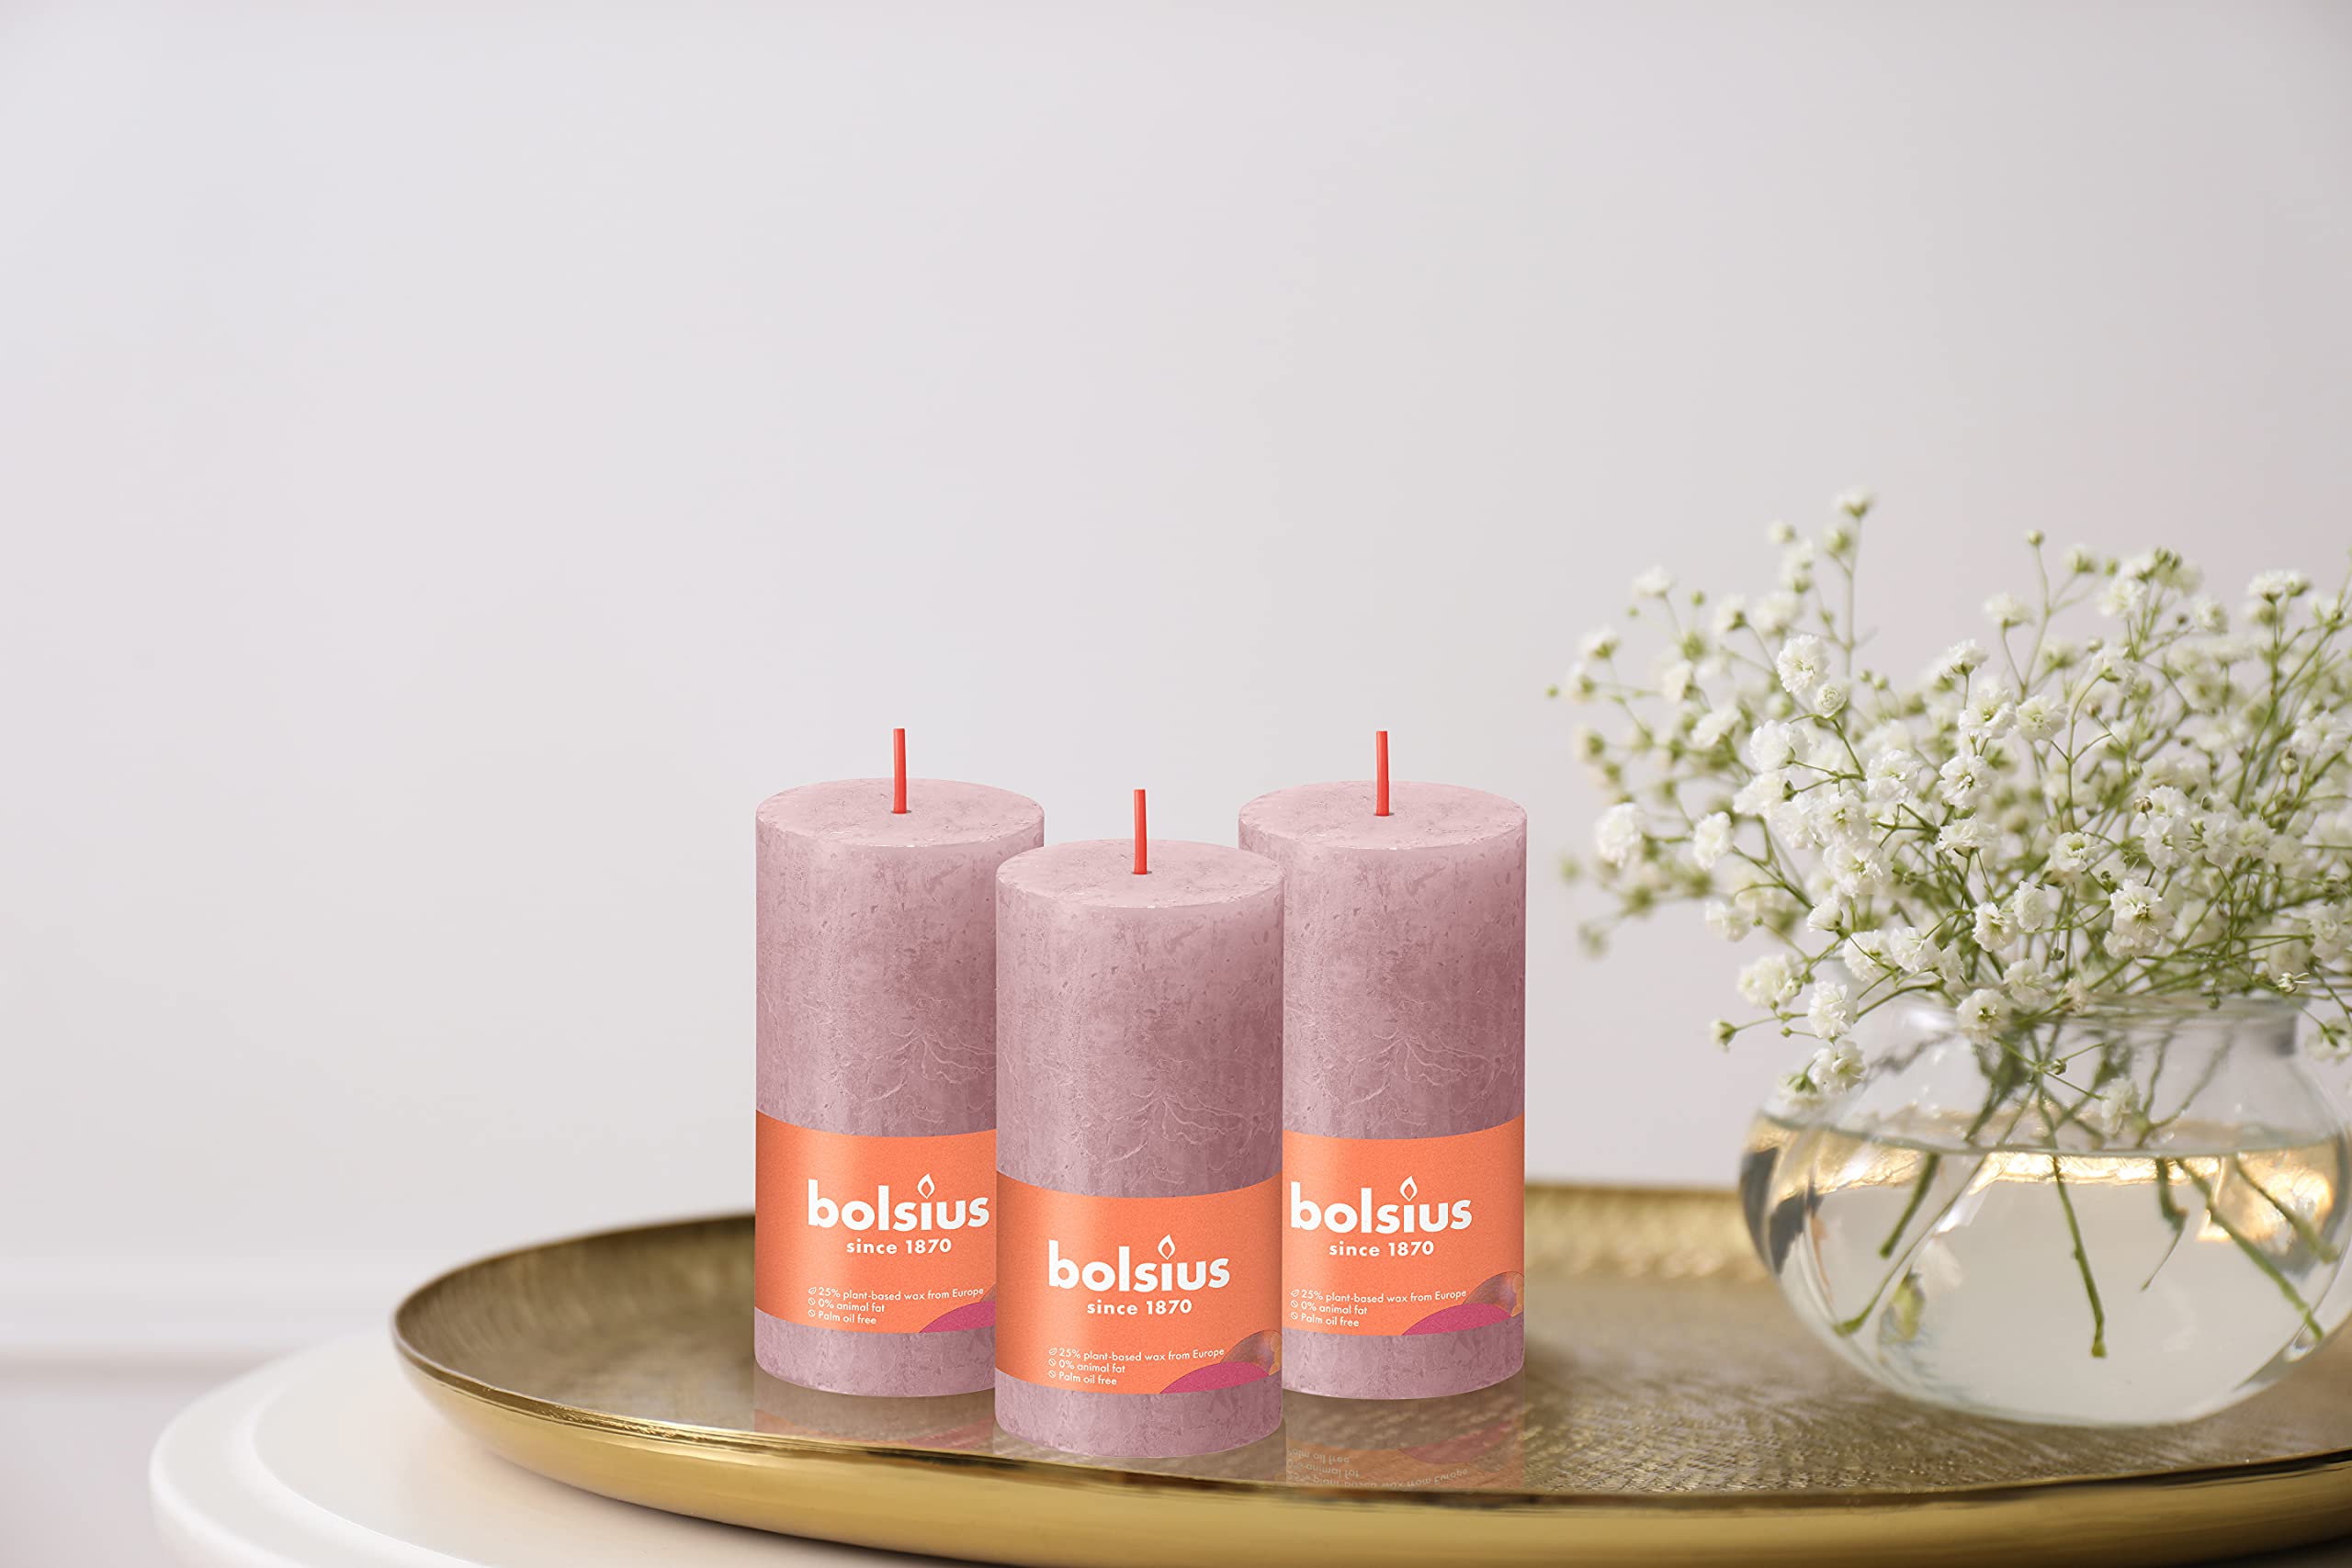 BOLSIUS 4 Pack Ash Rose Rustic Pillar Candles - 2 X 4 Inches - Premium European Quality - Includes Natural Plant-Based Wax - Unscented Dripless Smokeless 30 Hour Party D�cor and Wedding Candles  - Very Good